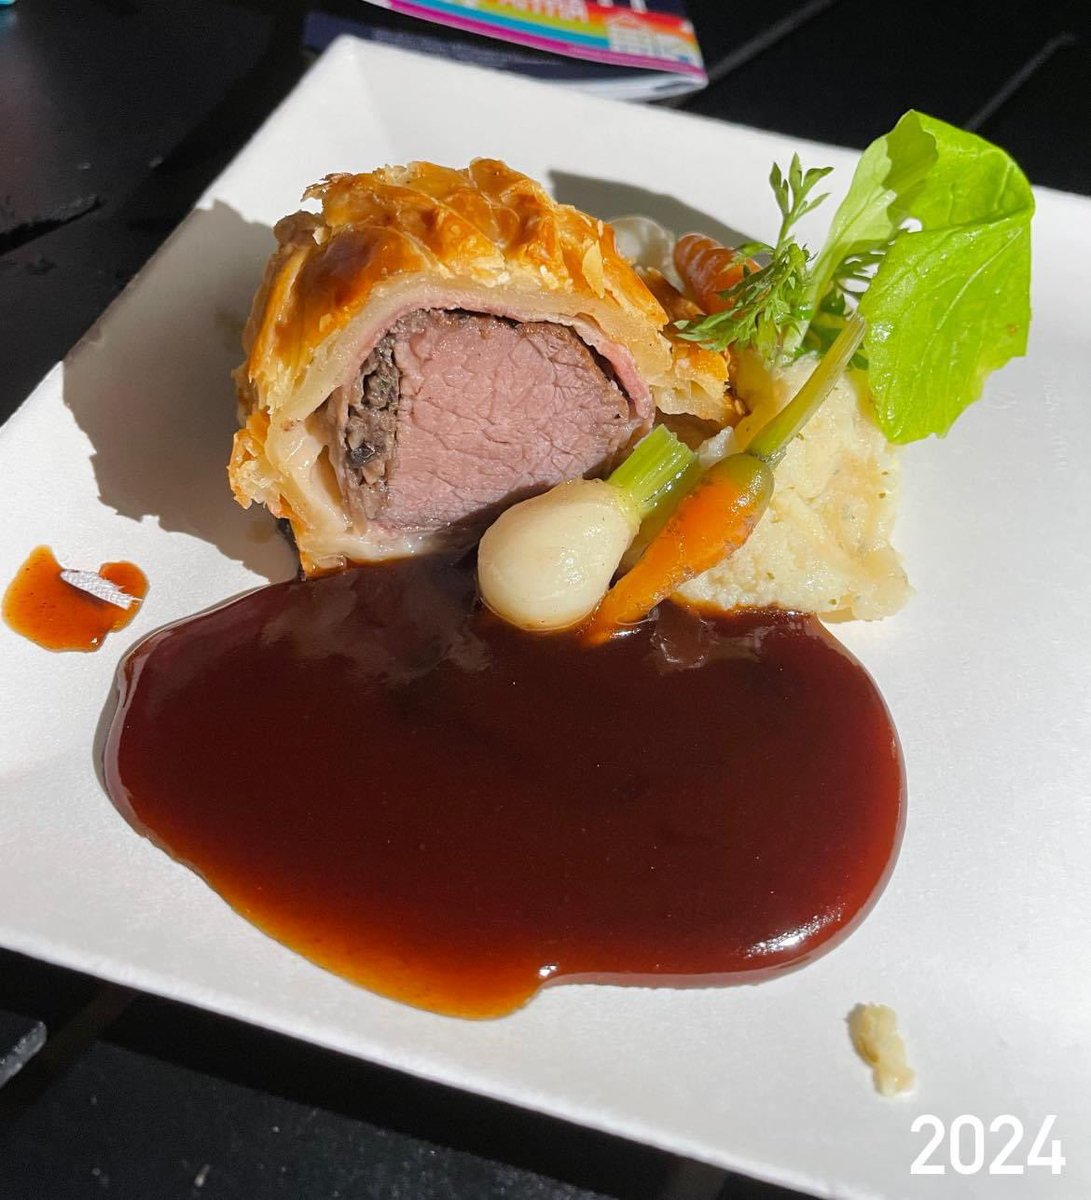 Epcot really stepped up the Beef Wellington presentation this year! Look at this glow up! 🤤

#epcot #disneyfood